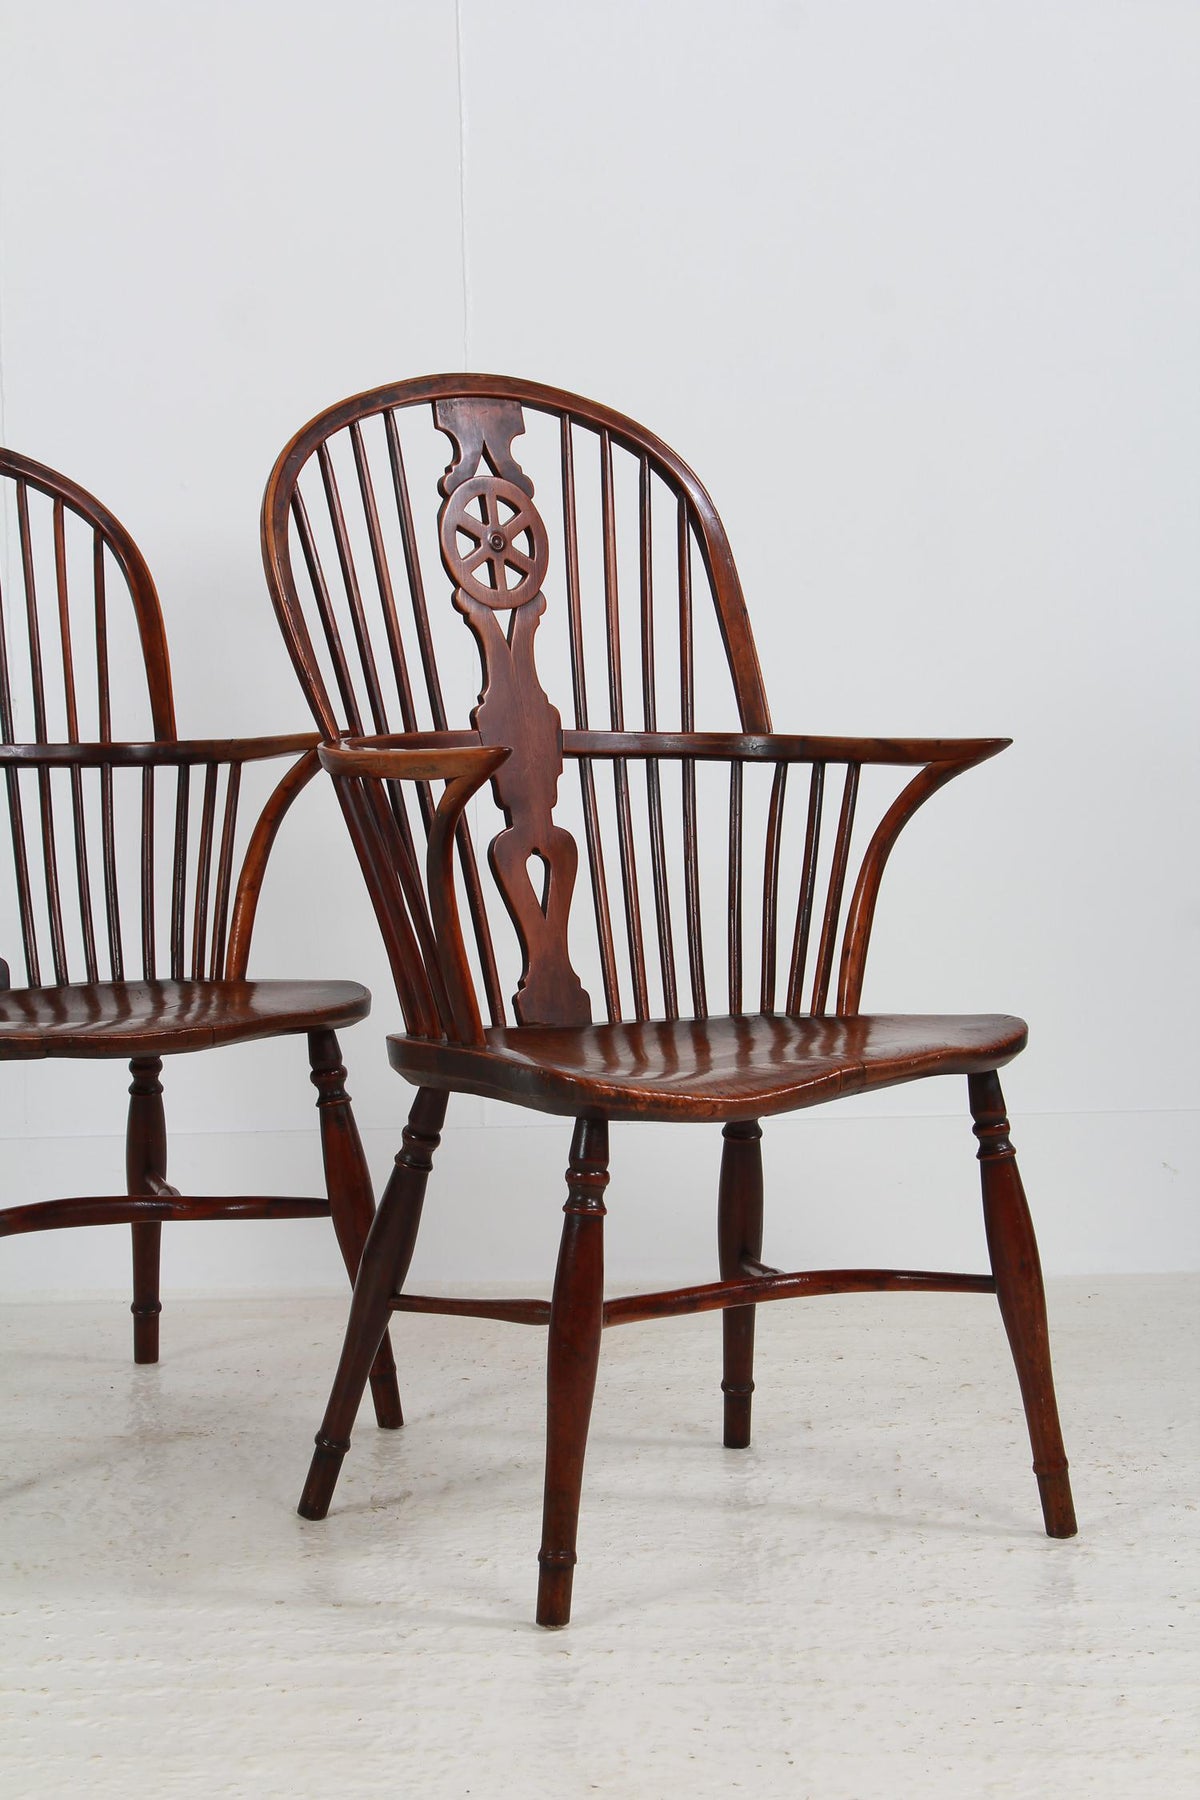 An Exceptionally Fine Pair of Yew Wood Wheel Back Windsor chairs